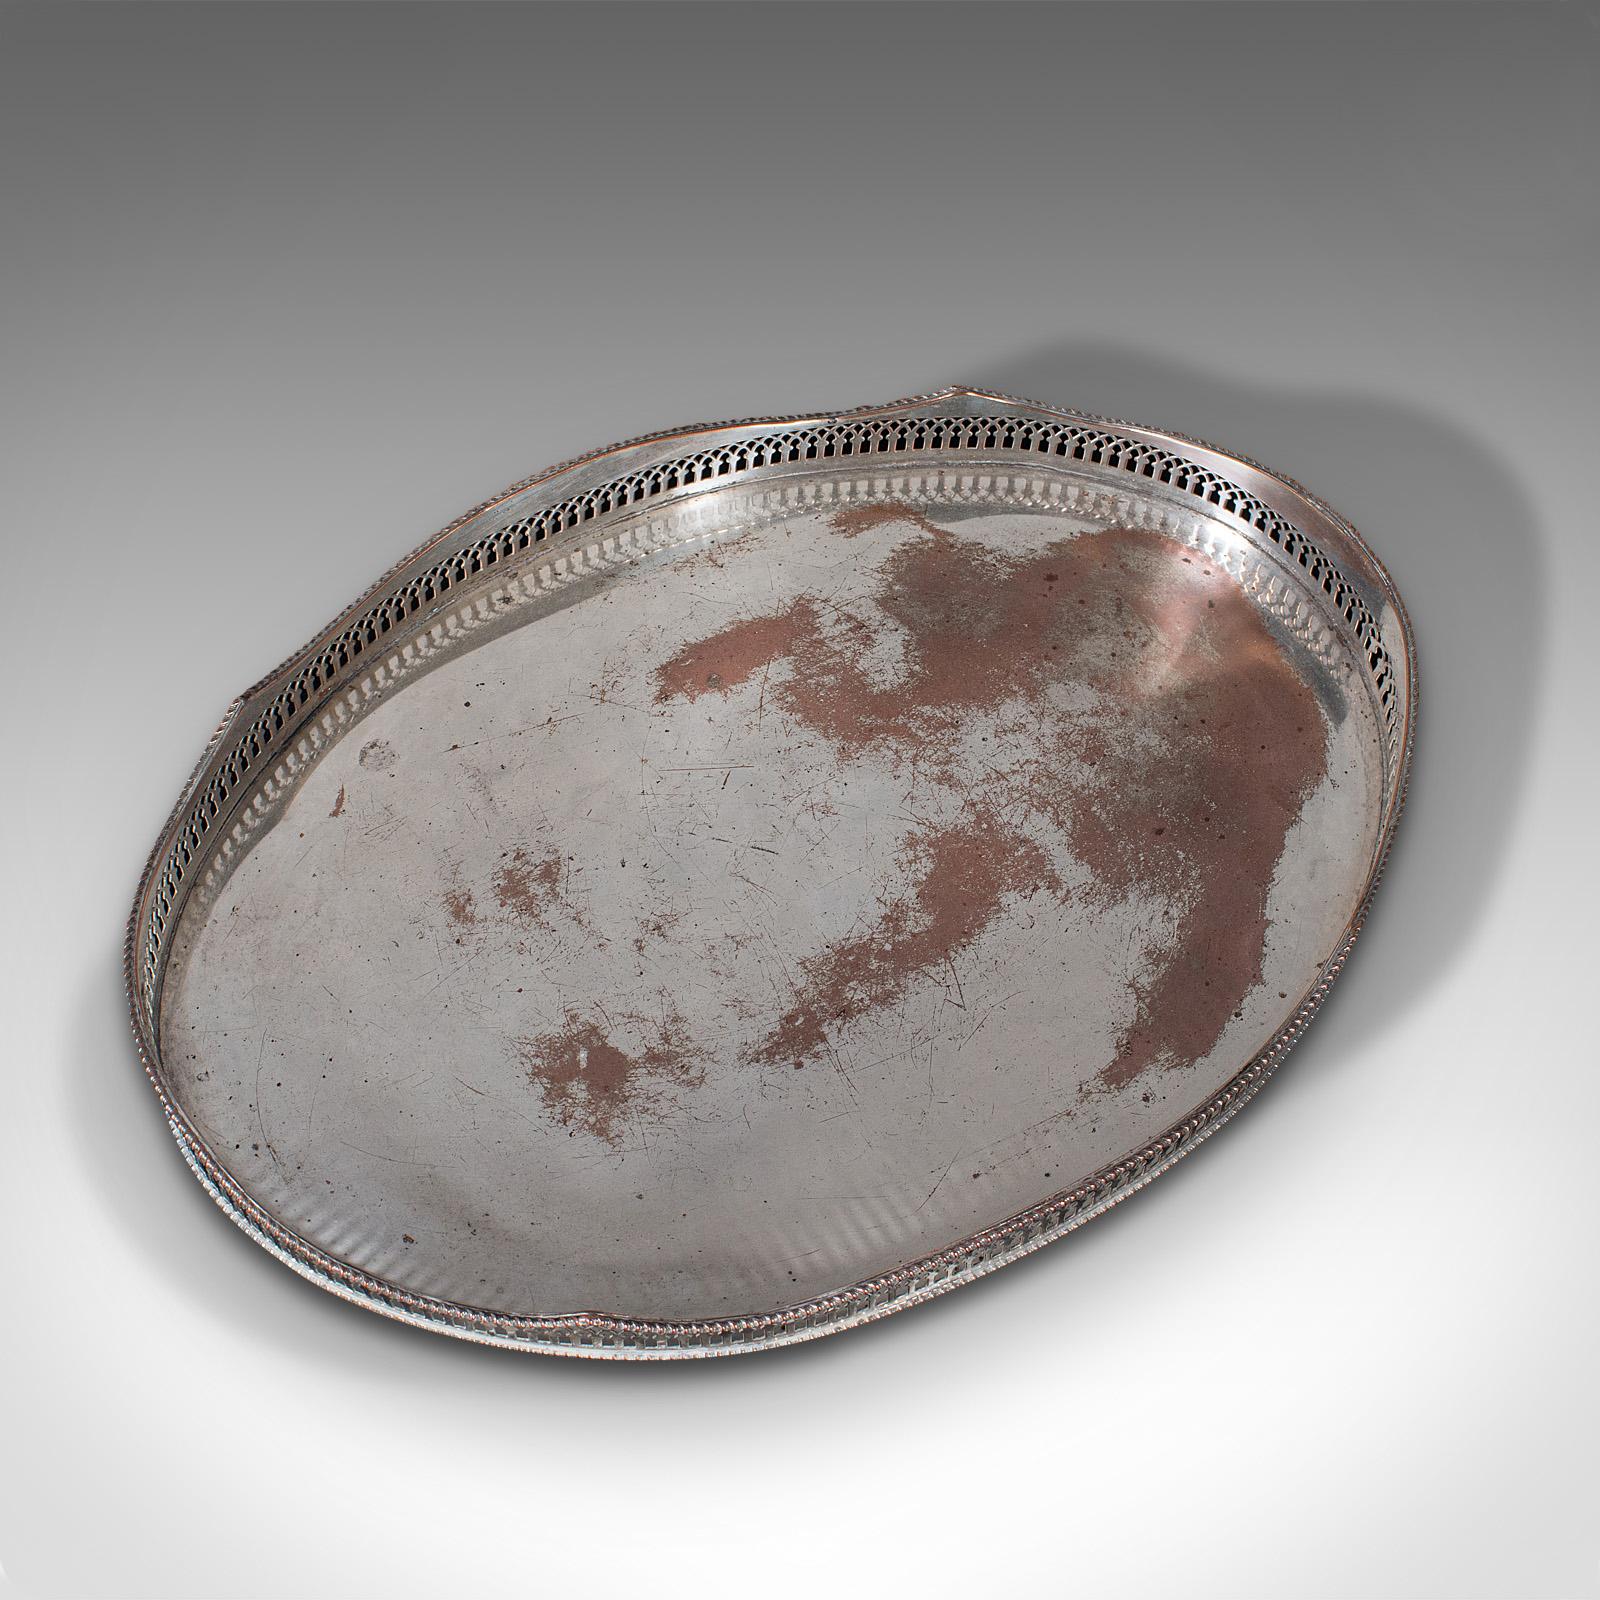 Vintage Decorative Serving Tray, English, Silver Plate Afternoon Tea, Oval, 1930 1